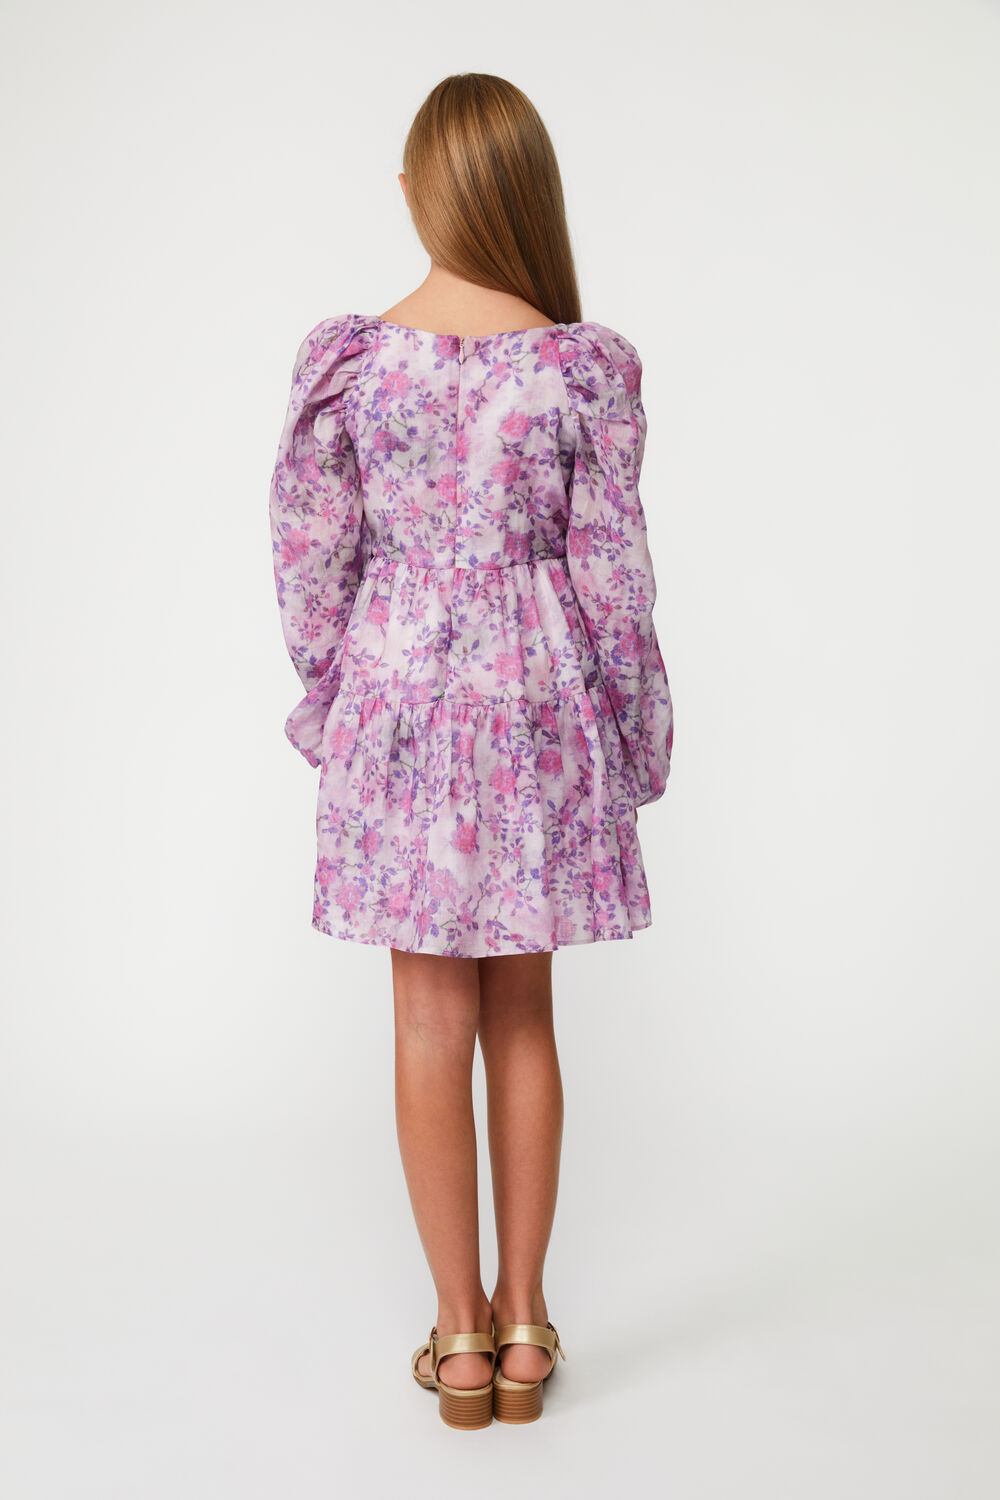 Girls AUDREY FLORAL DRESS in colour METEORITE